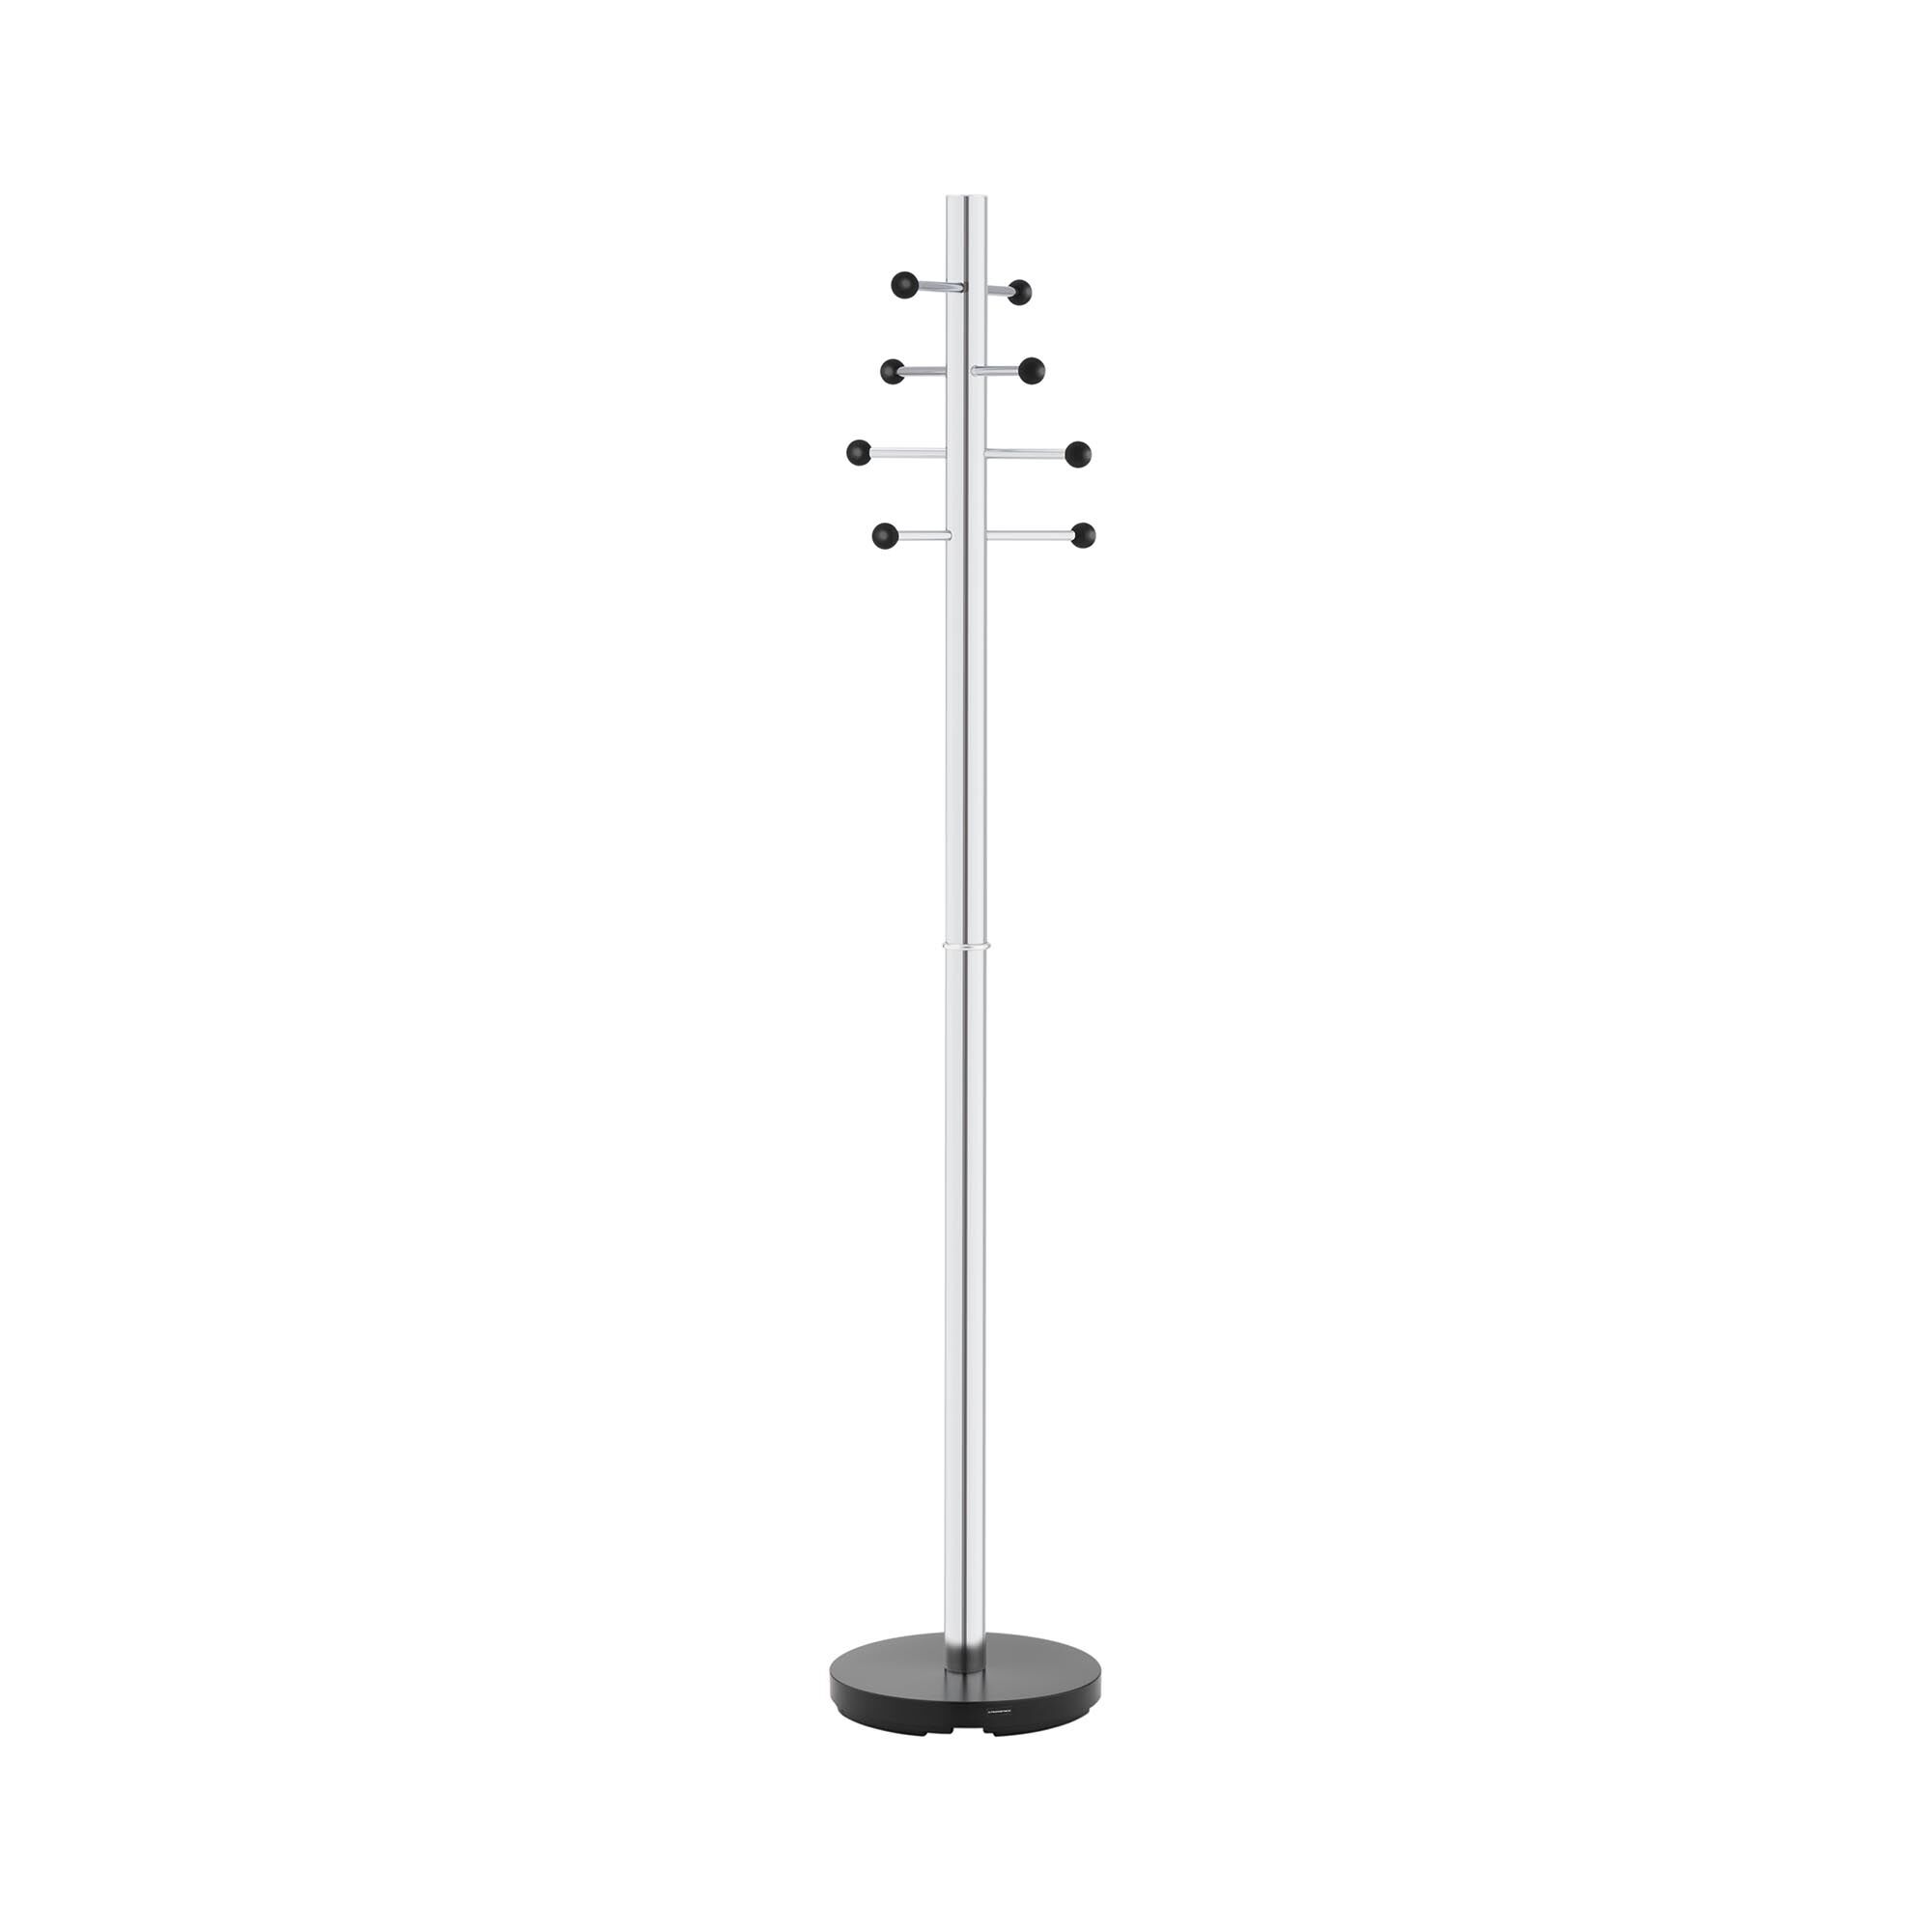 Fromm & Starck Coat Stand - 8 pegs - chrome-plated - round base